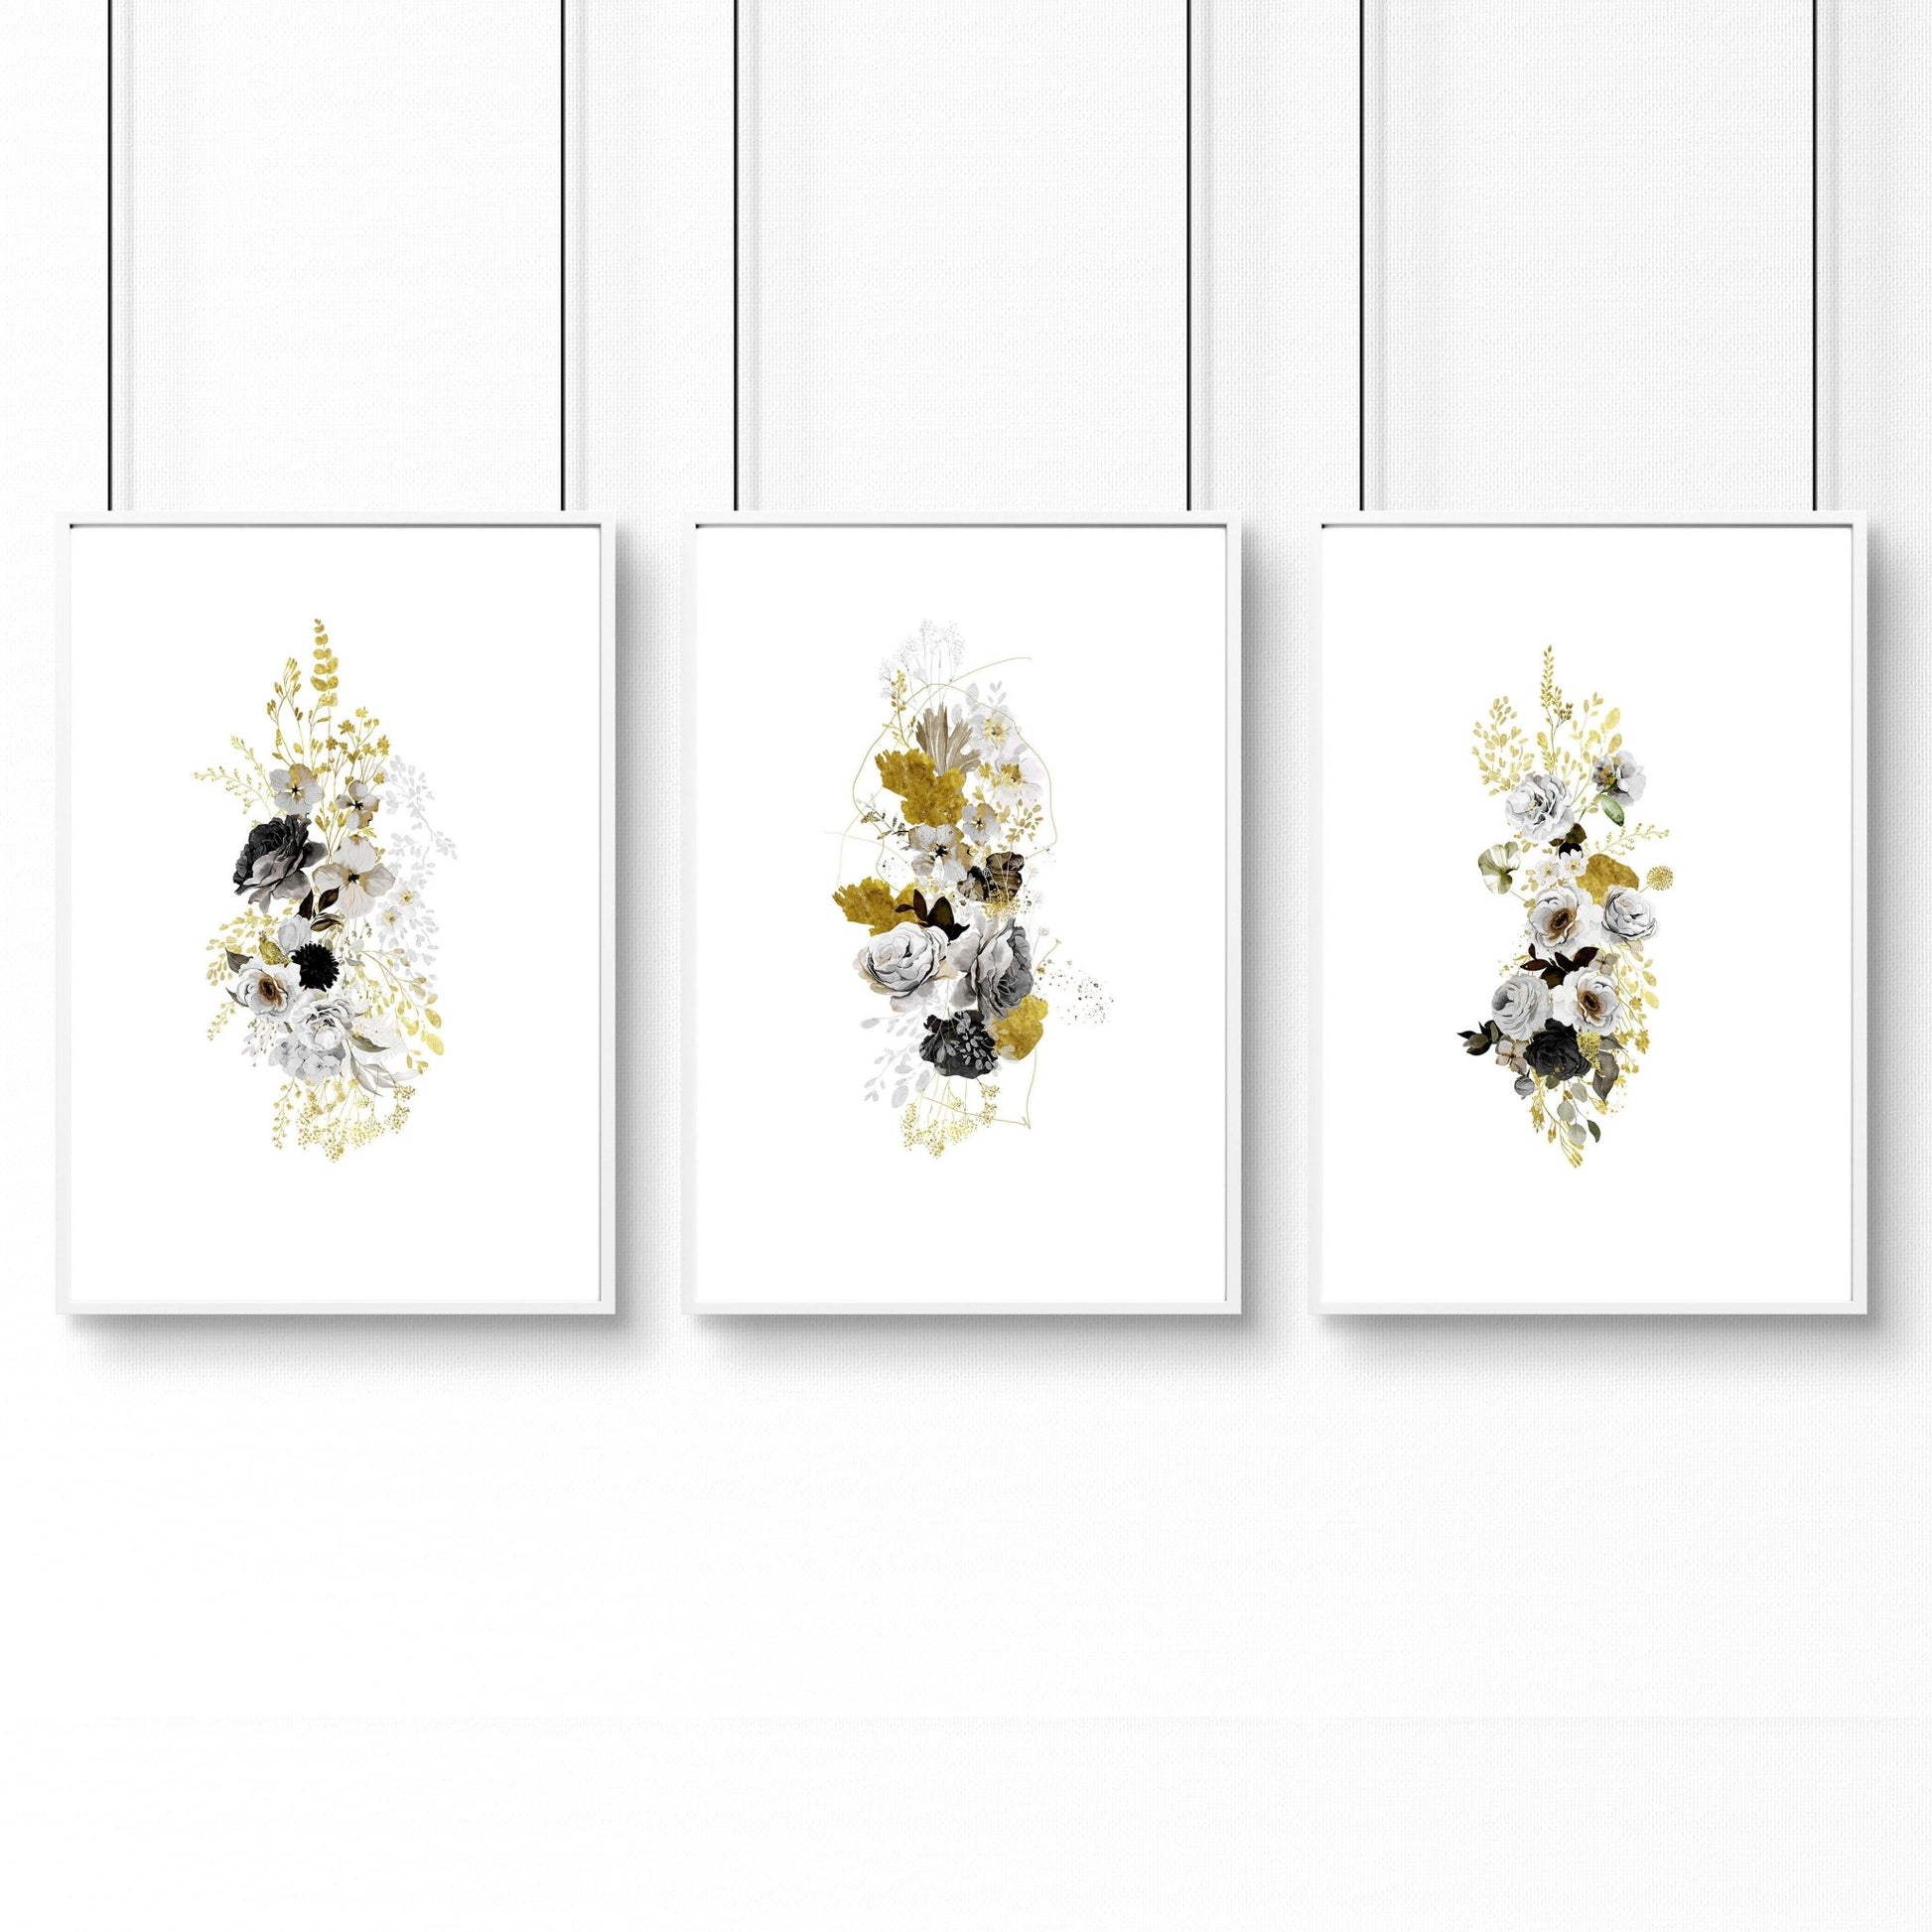 Wall decor for the bathroom | set of 3 Shabby Chic wall prints